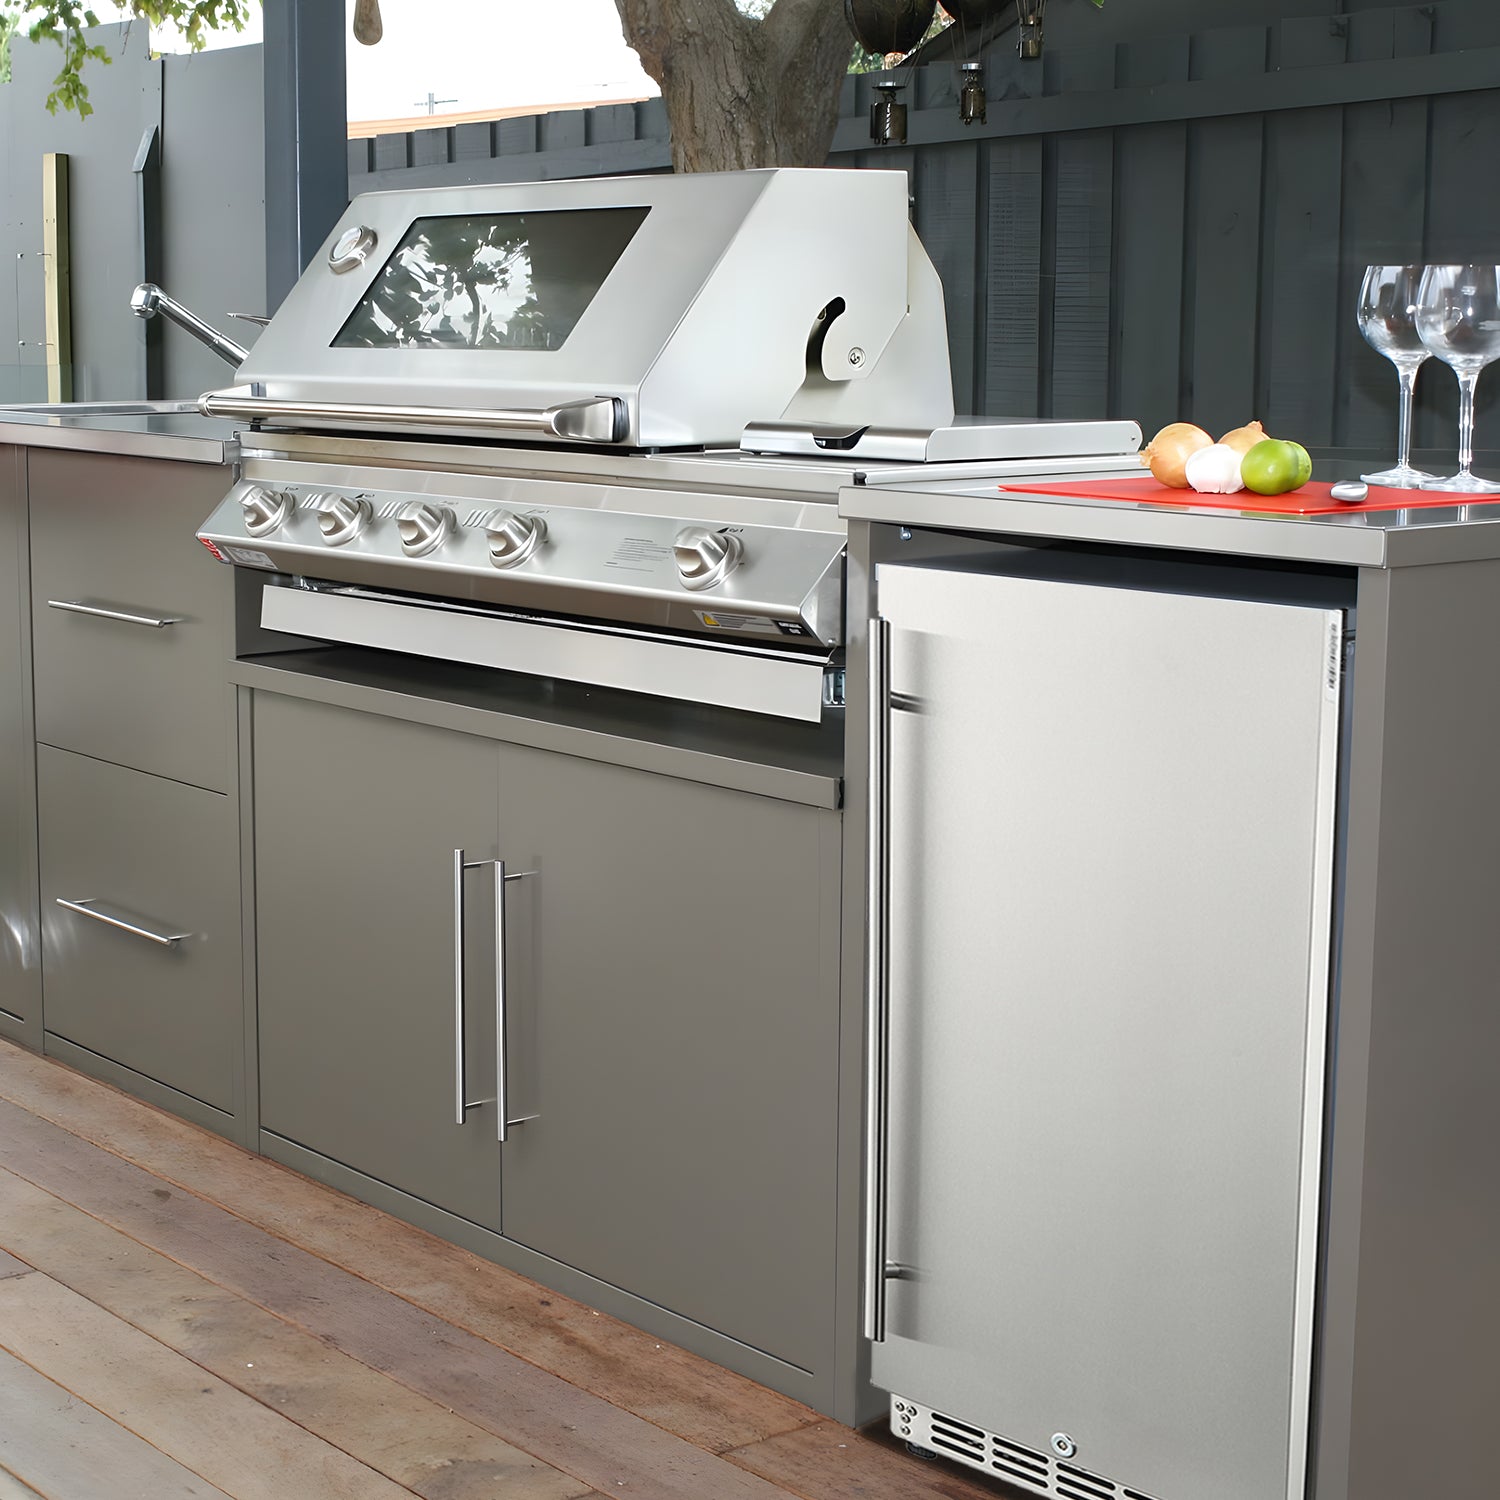 Side view of an outdoor kitchen setup with a 3.2 Cu Ft Undercounter Beverage Refrigerator installed beside a barbecue grill